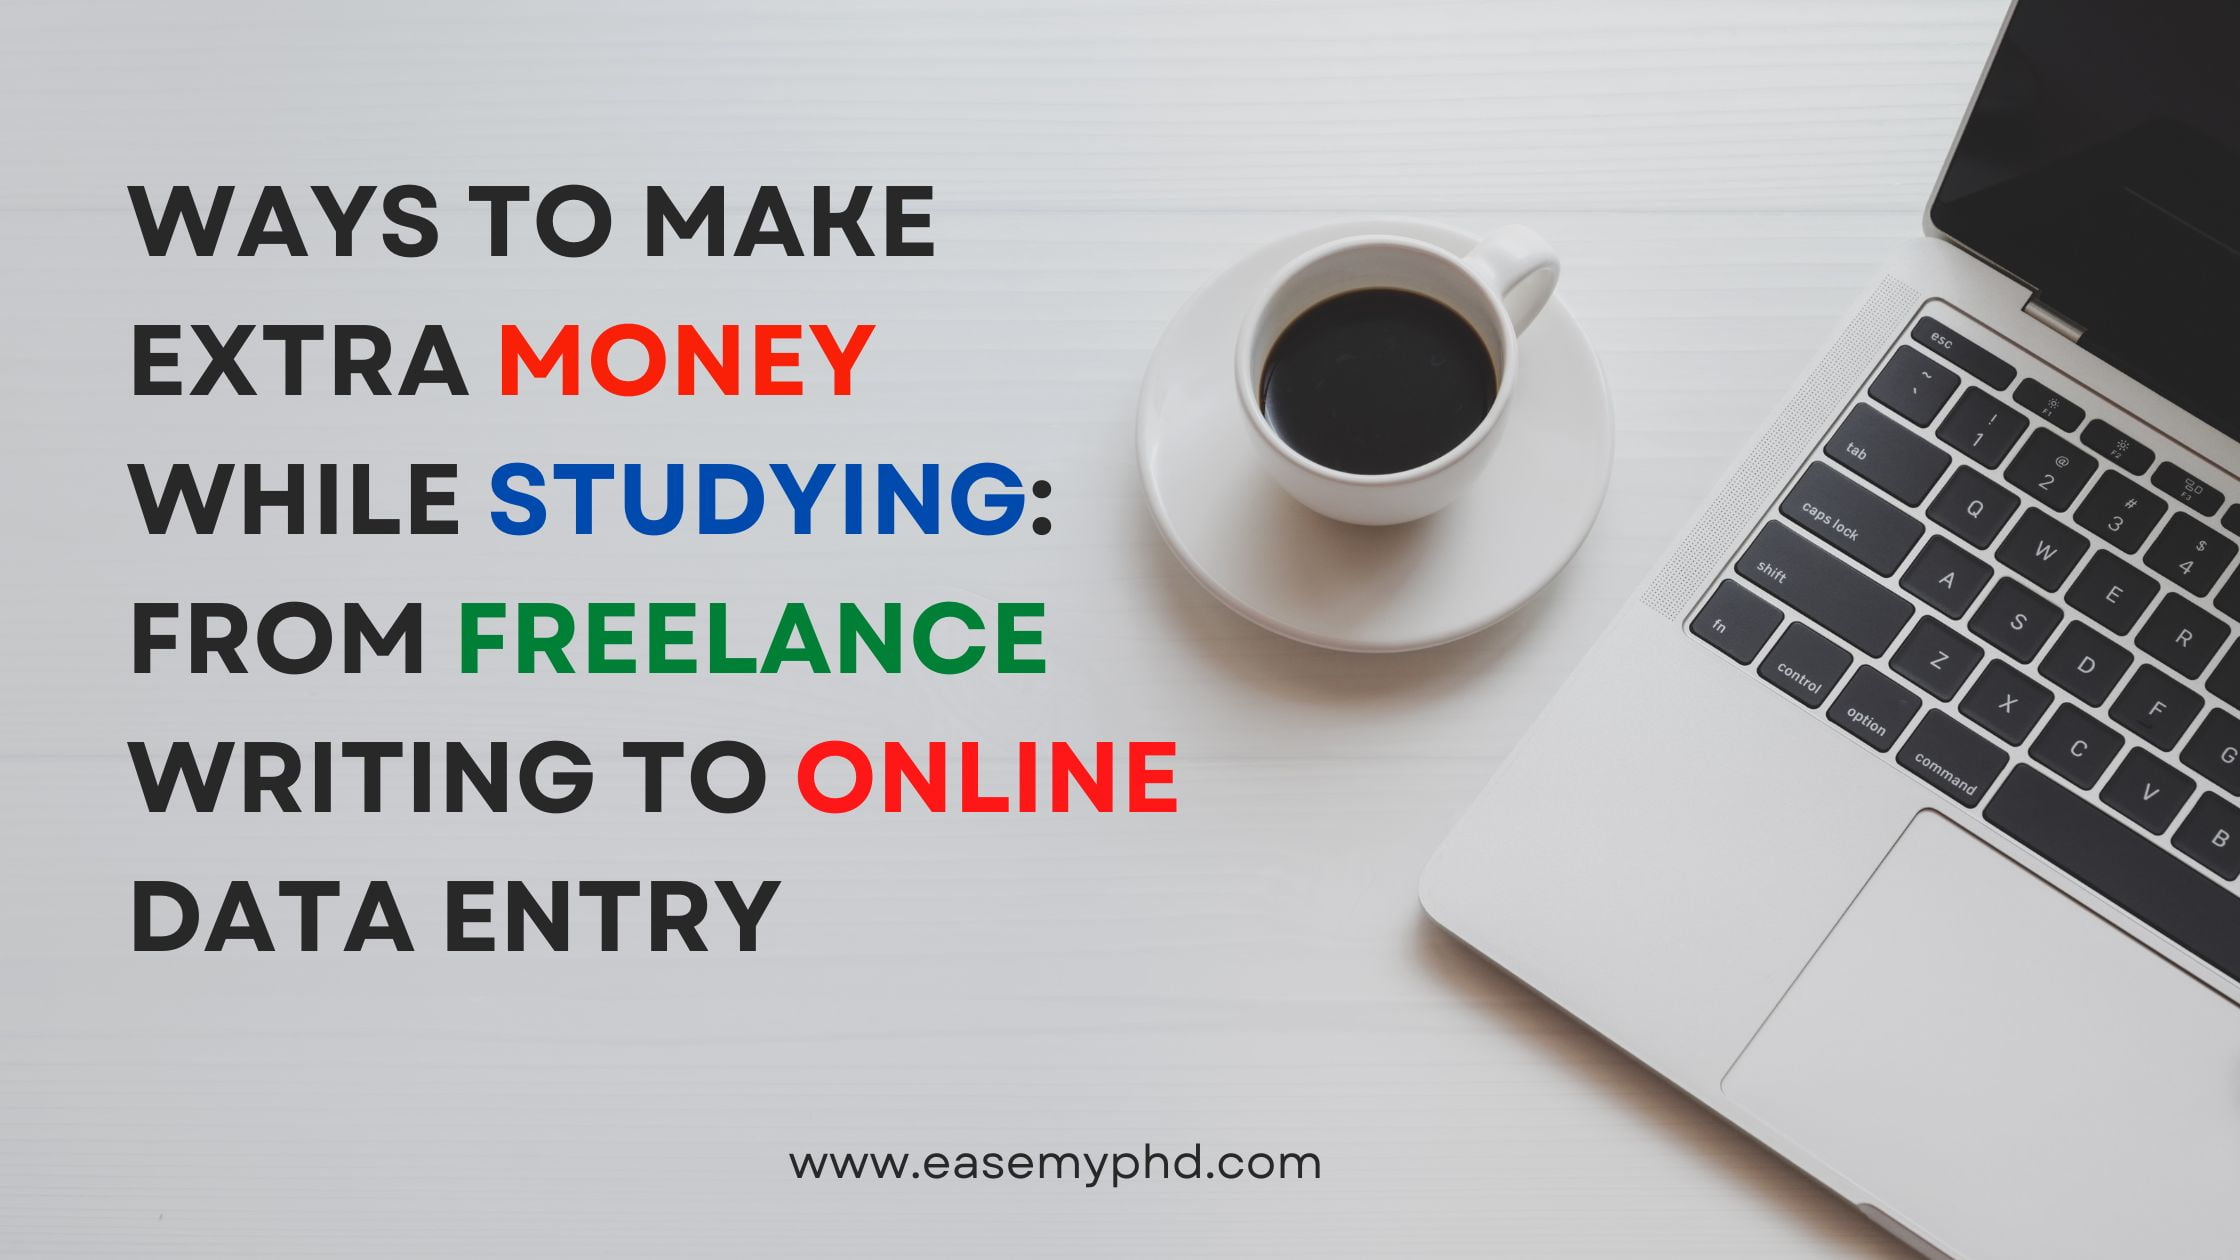 Ways-to-Make-Extra-Money-while-Studying-From-Freelance-Writing-to-Online-Data-Entry-EaseMyPhD.com